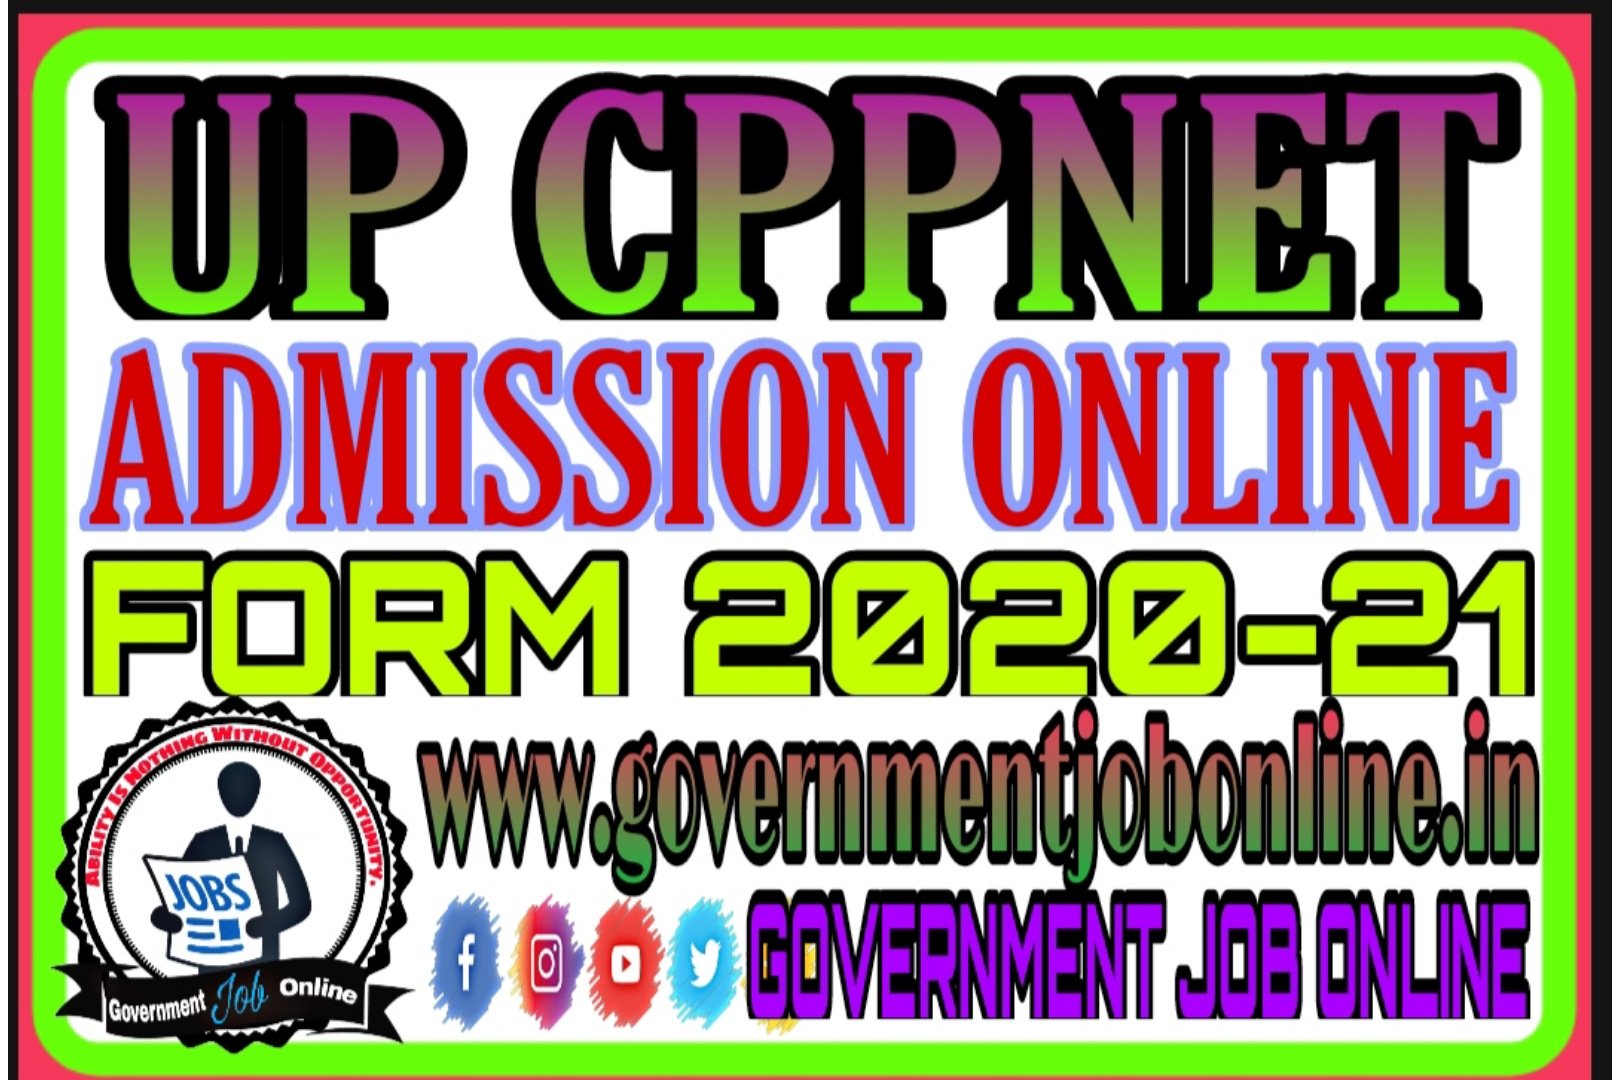 UP CPPNET Admission 2020 Online Form